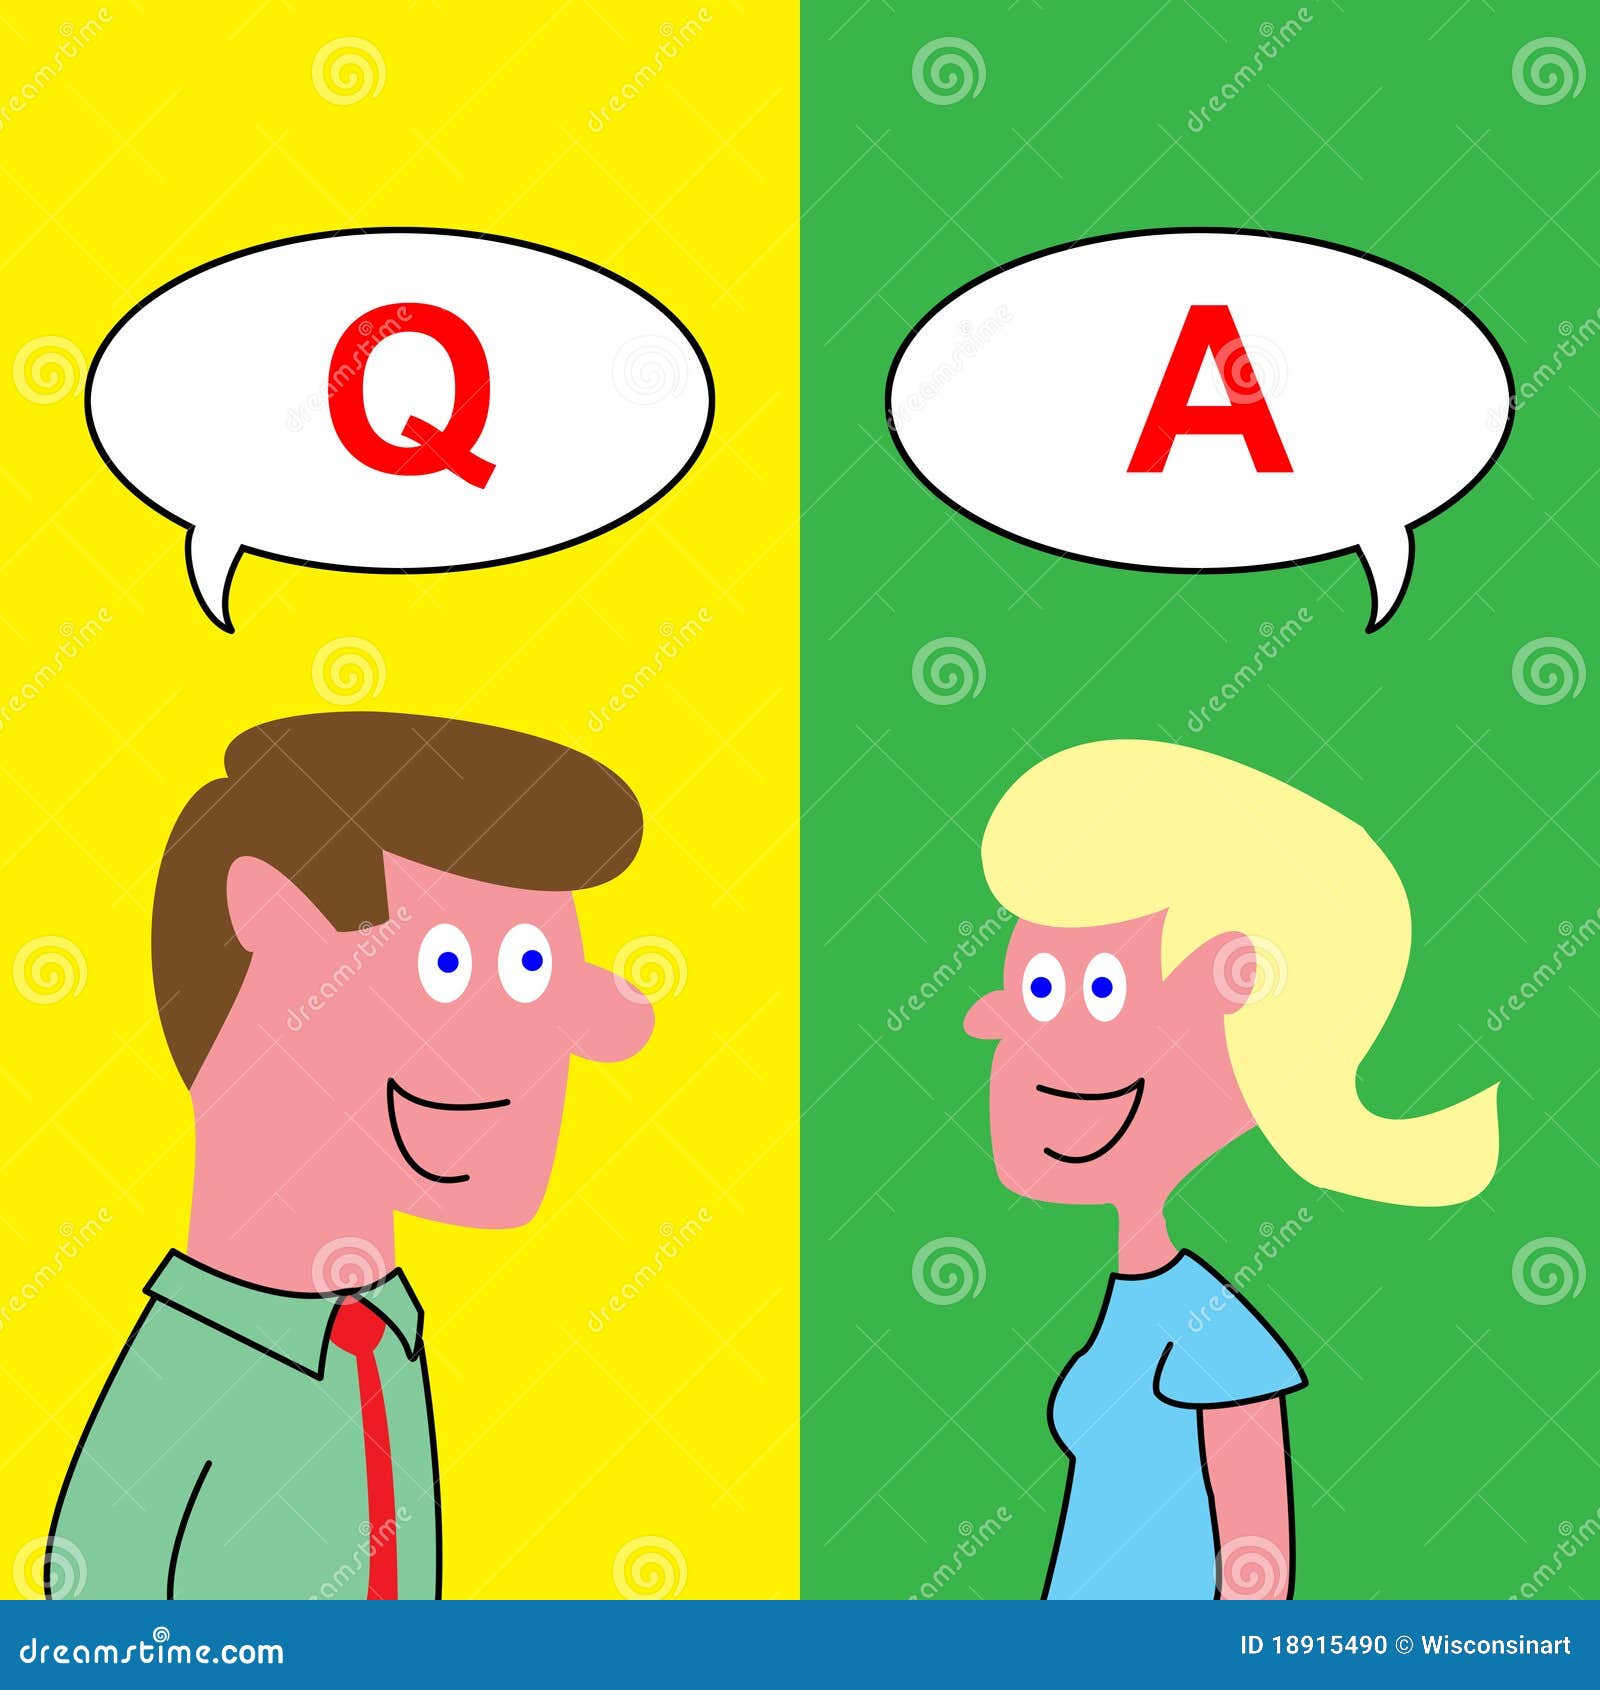 clipart of question and answer - photo #43